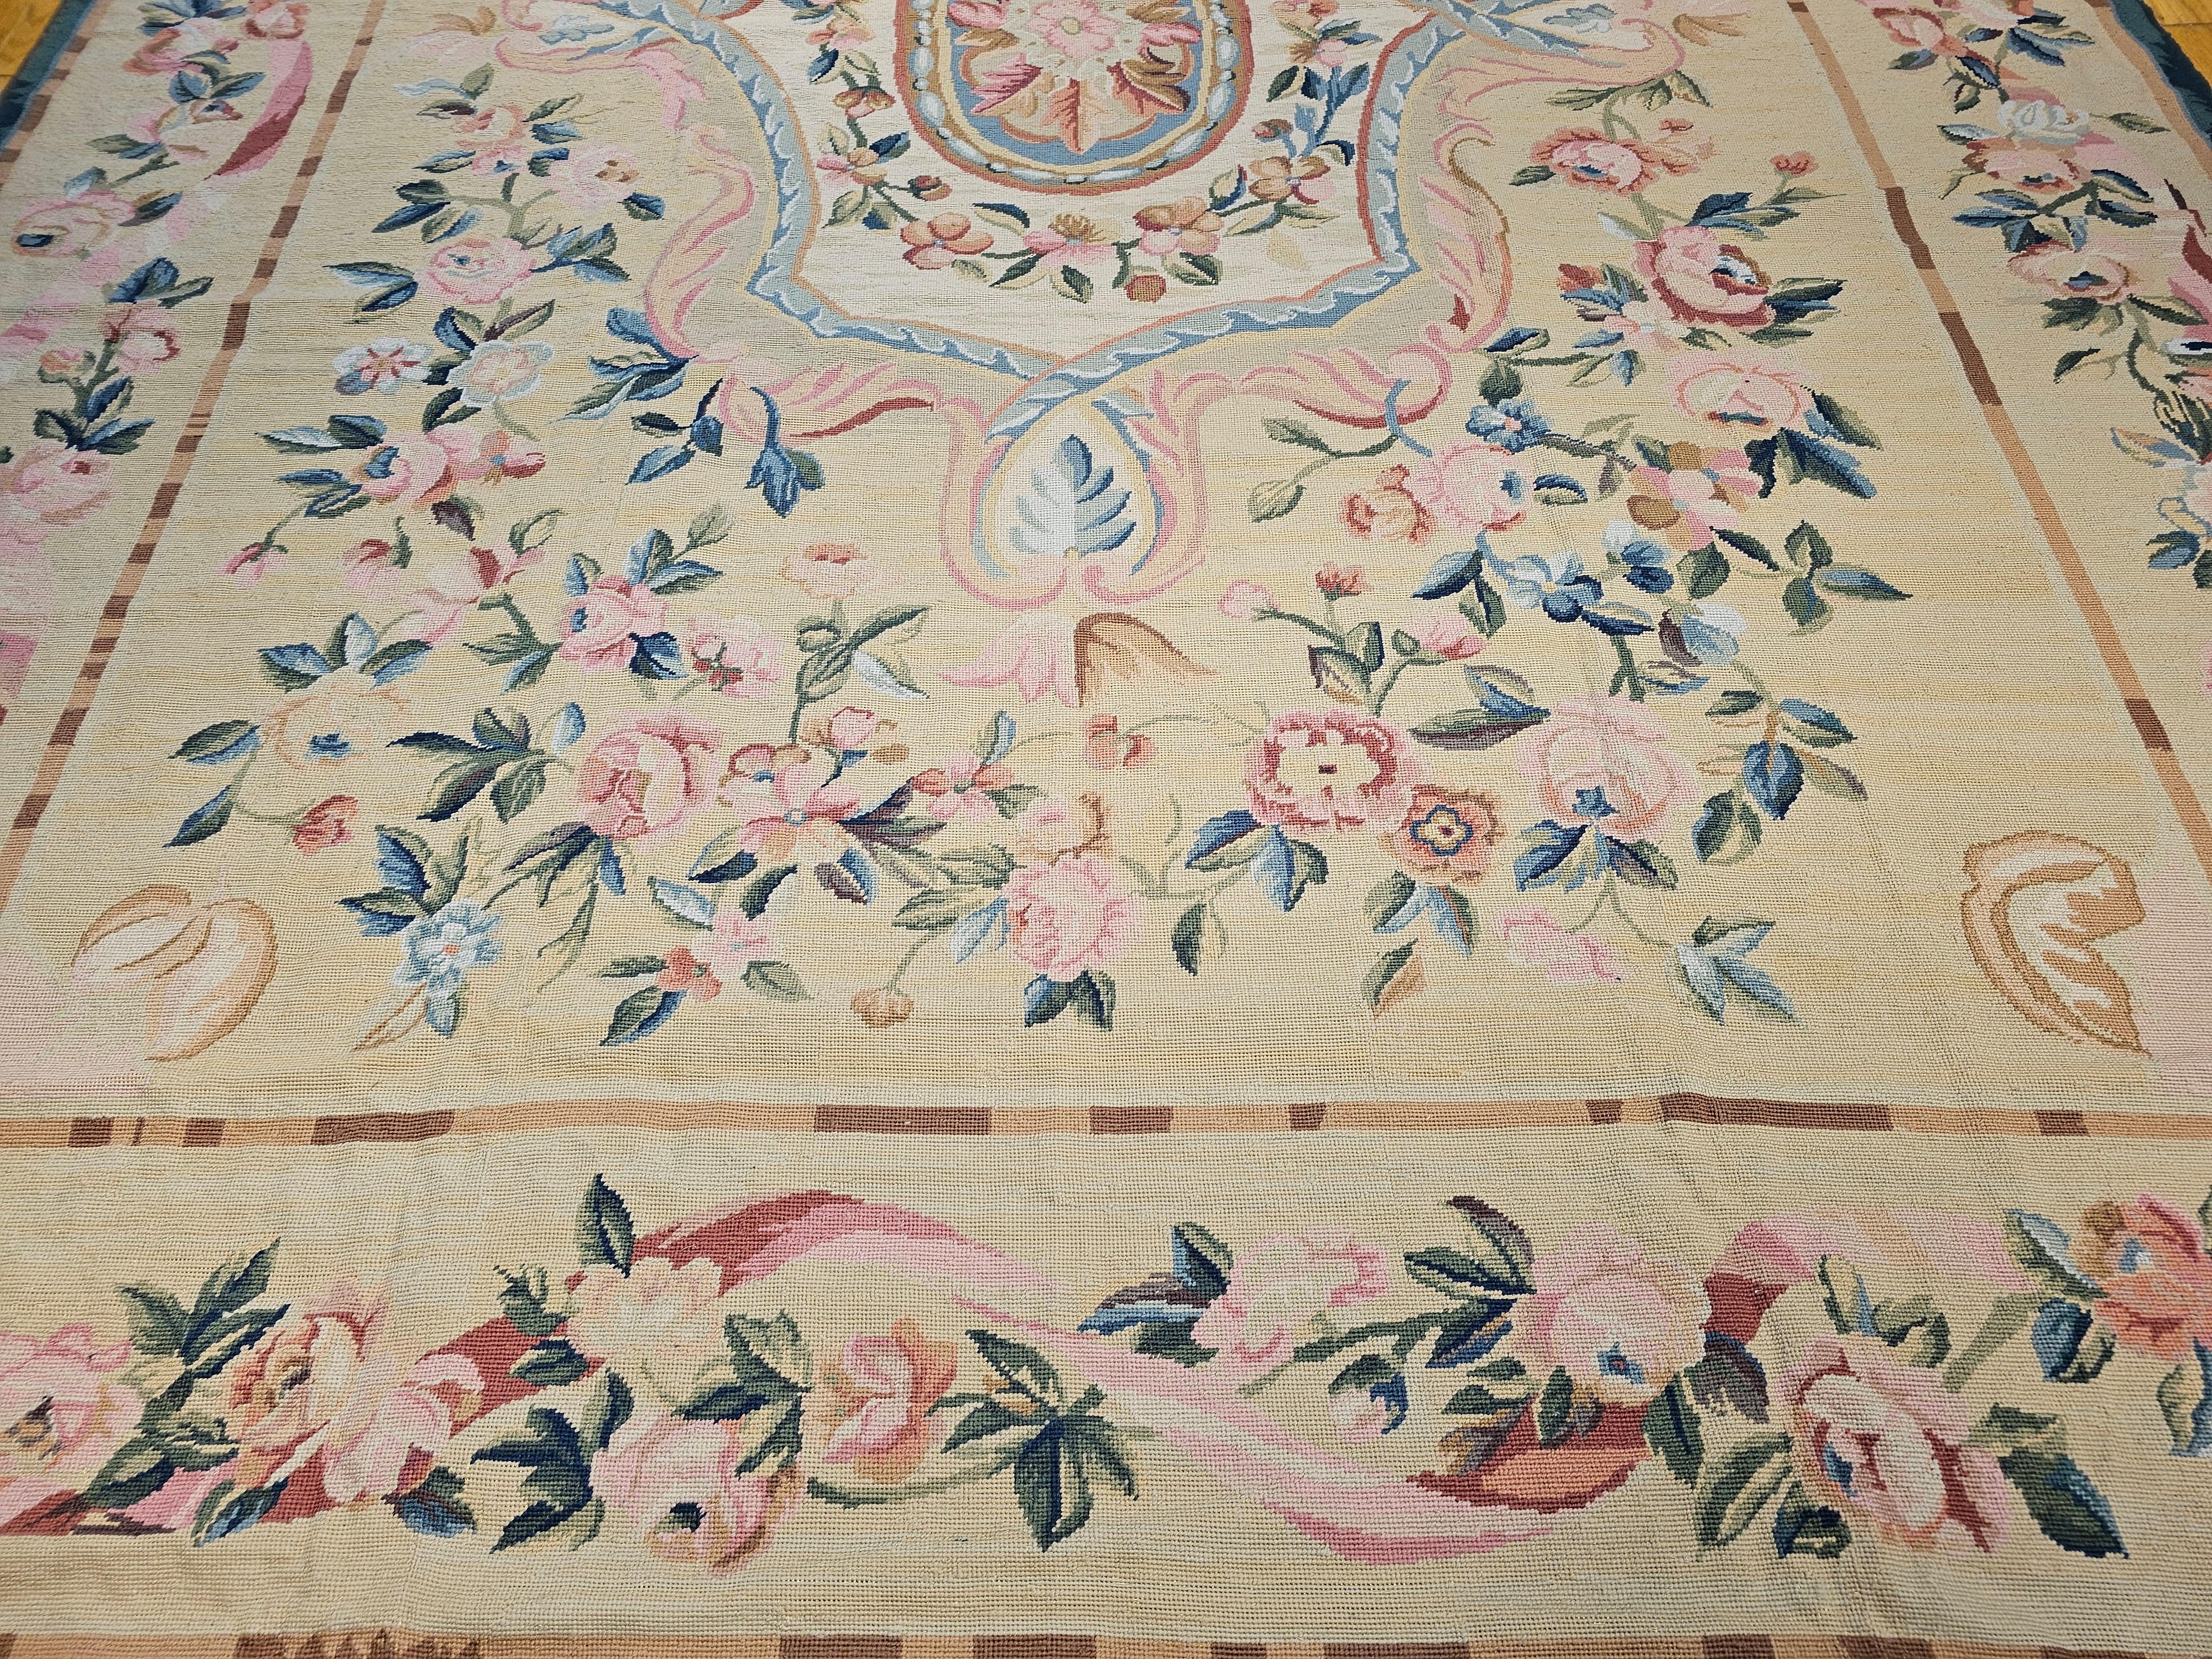 19th Century French Aubusson Needlepoint Carpet in Floral Pattern in Ivory, Blue In Good Condition For Sale In Barrington, IL